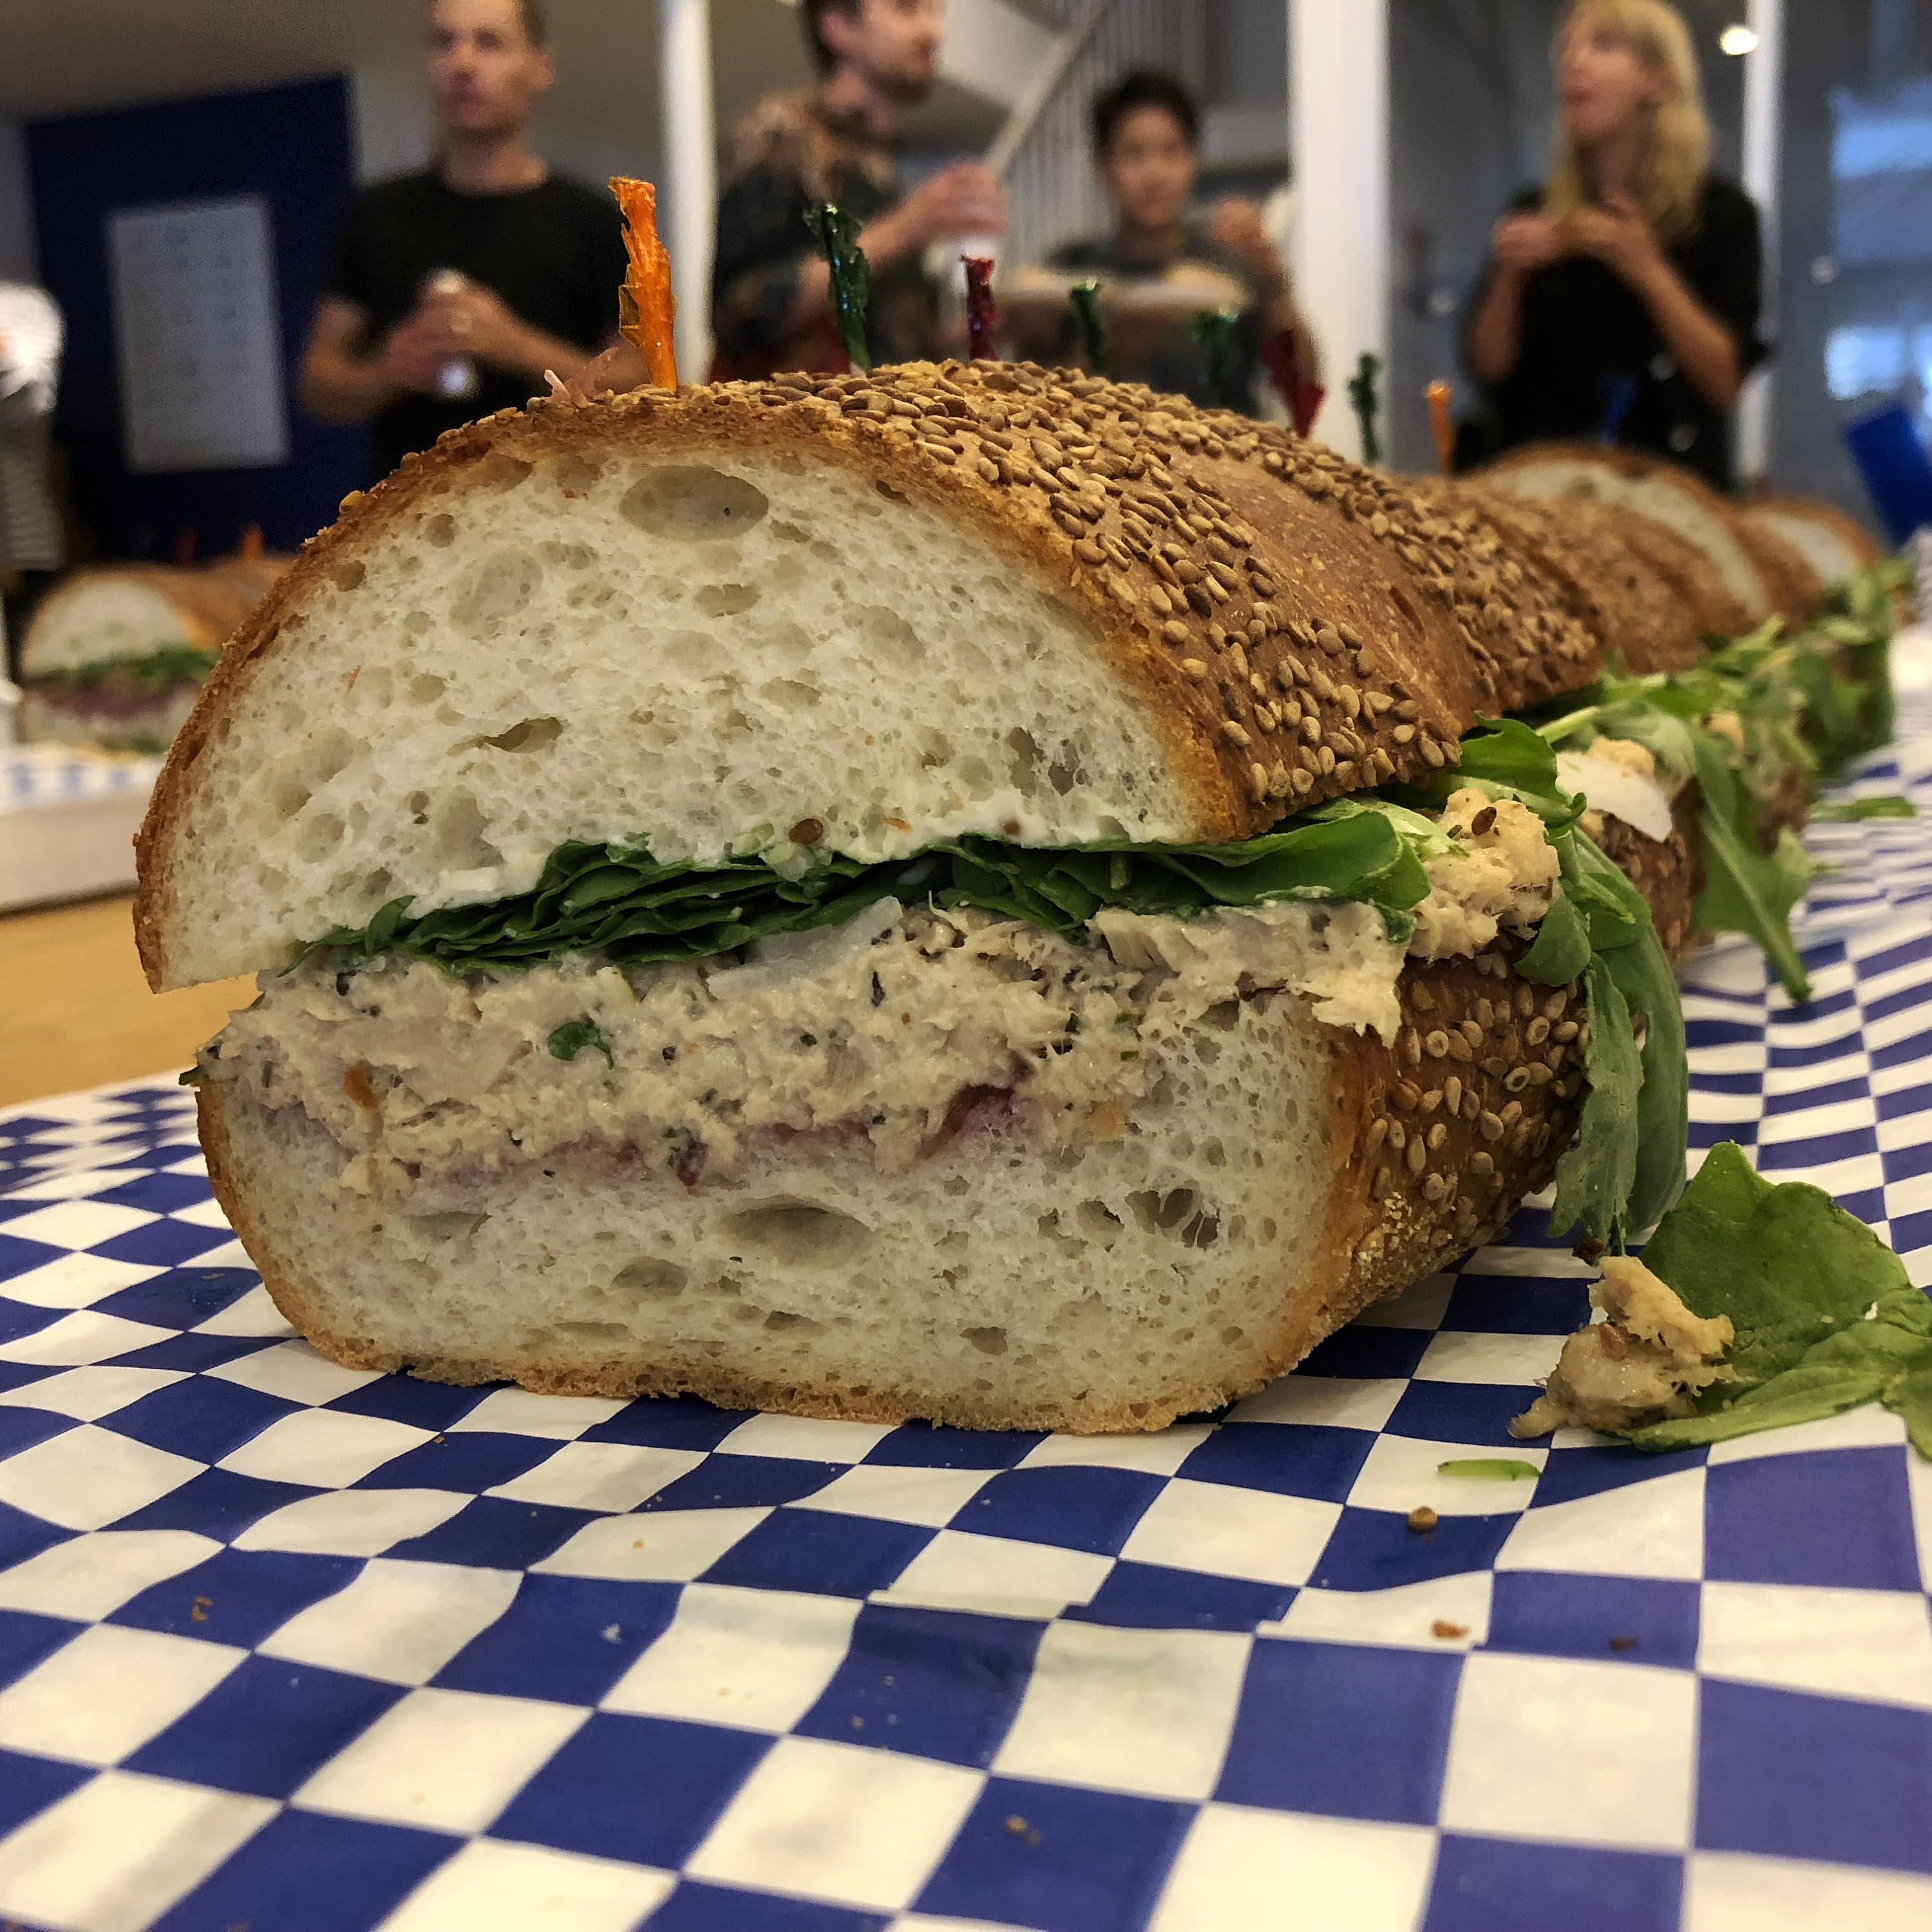 A close-up of a large sandwich cut into sections, with sesame seed-topped bread, filled with leafy greens and a creamy spread, placed on blue and white checkered paper. Several people are in the background, some talking and others taking photos.